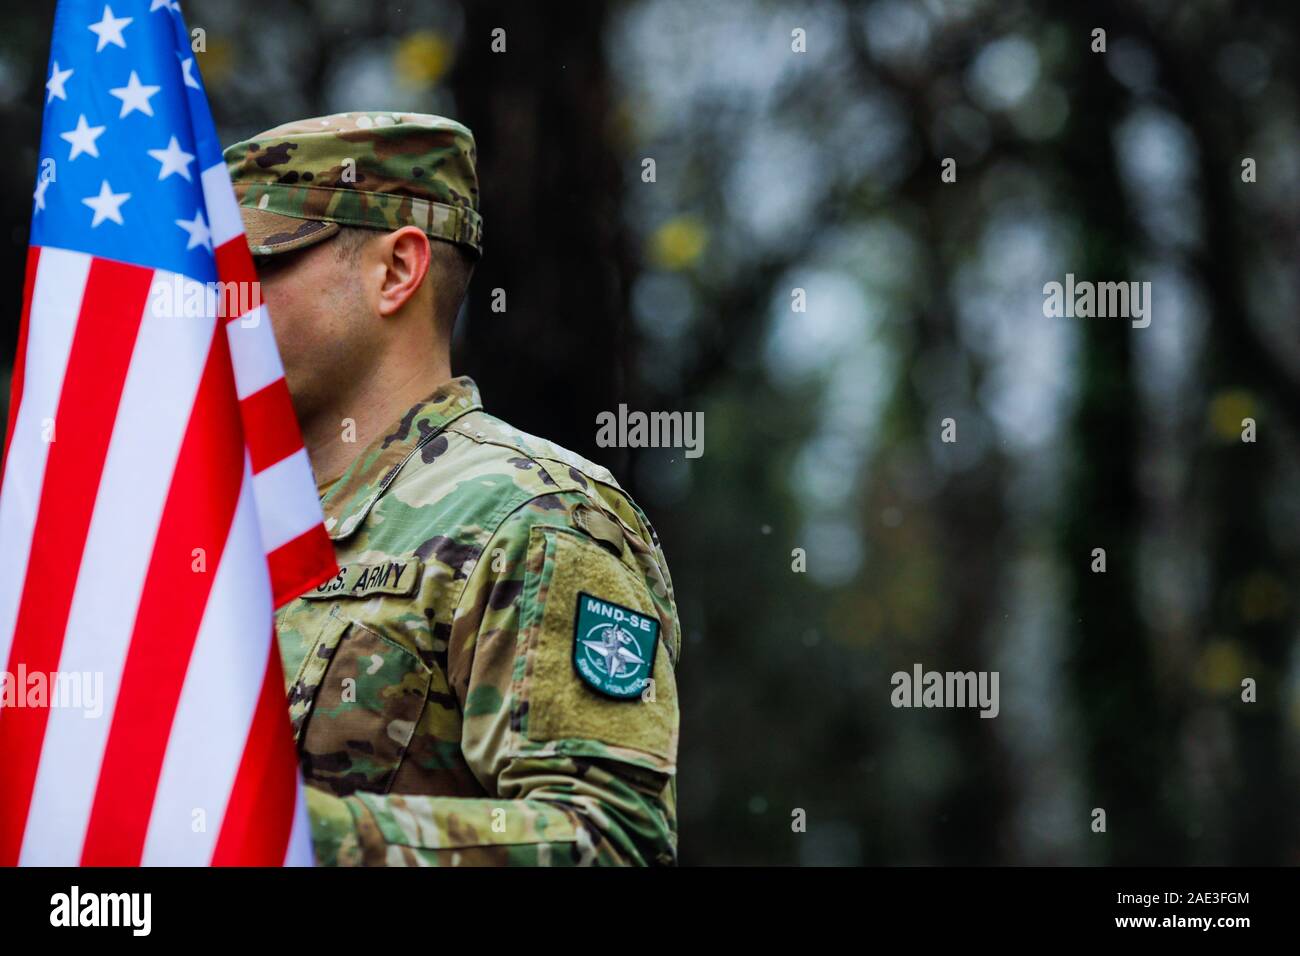 Bucharest, Romania - December 1, 2019: Shallow depth of field image (selective focus) with details of a US army soldier holding a flag and having MNDS Stock Photo